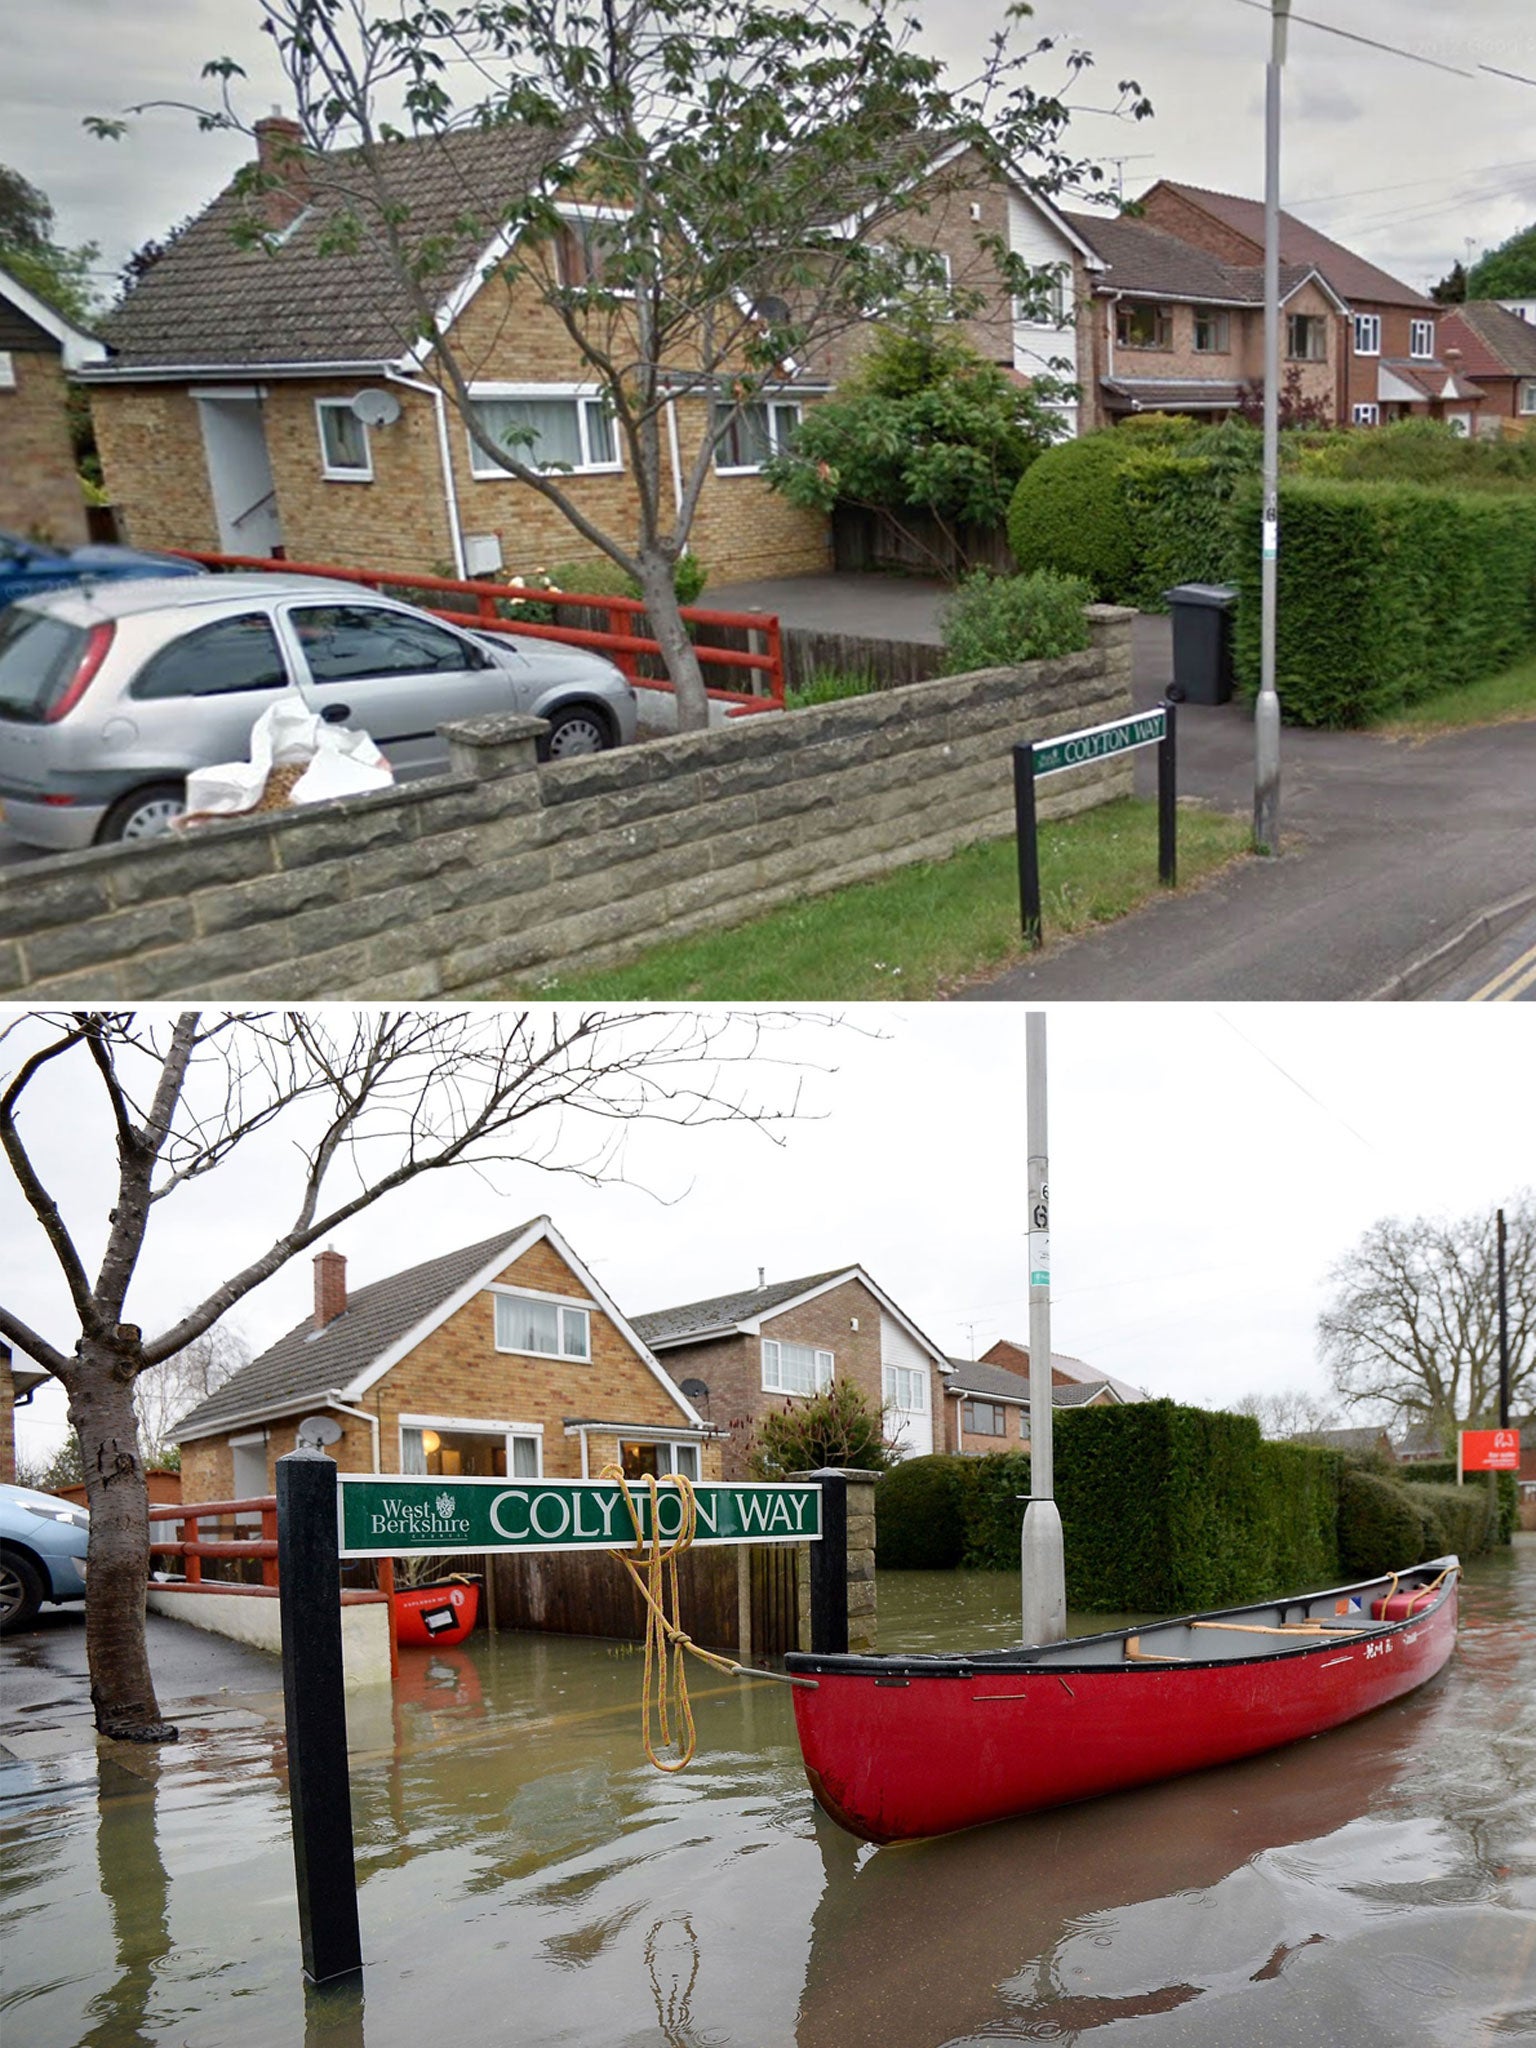 Other towns and villages along the Thames area, such as Purley-on-Thames, have also experienced severe flooding